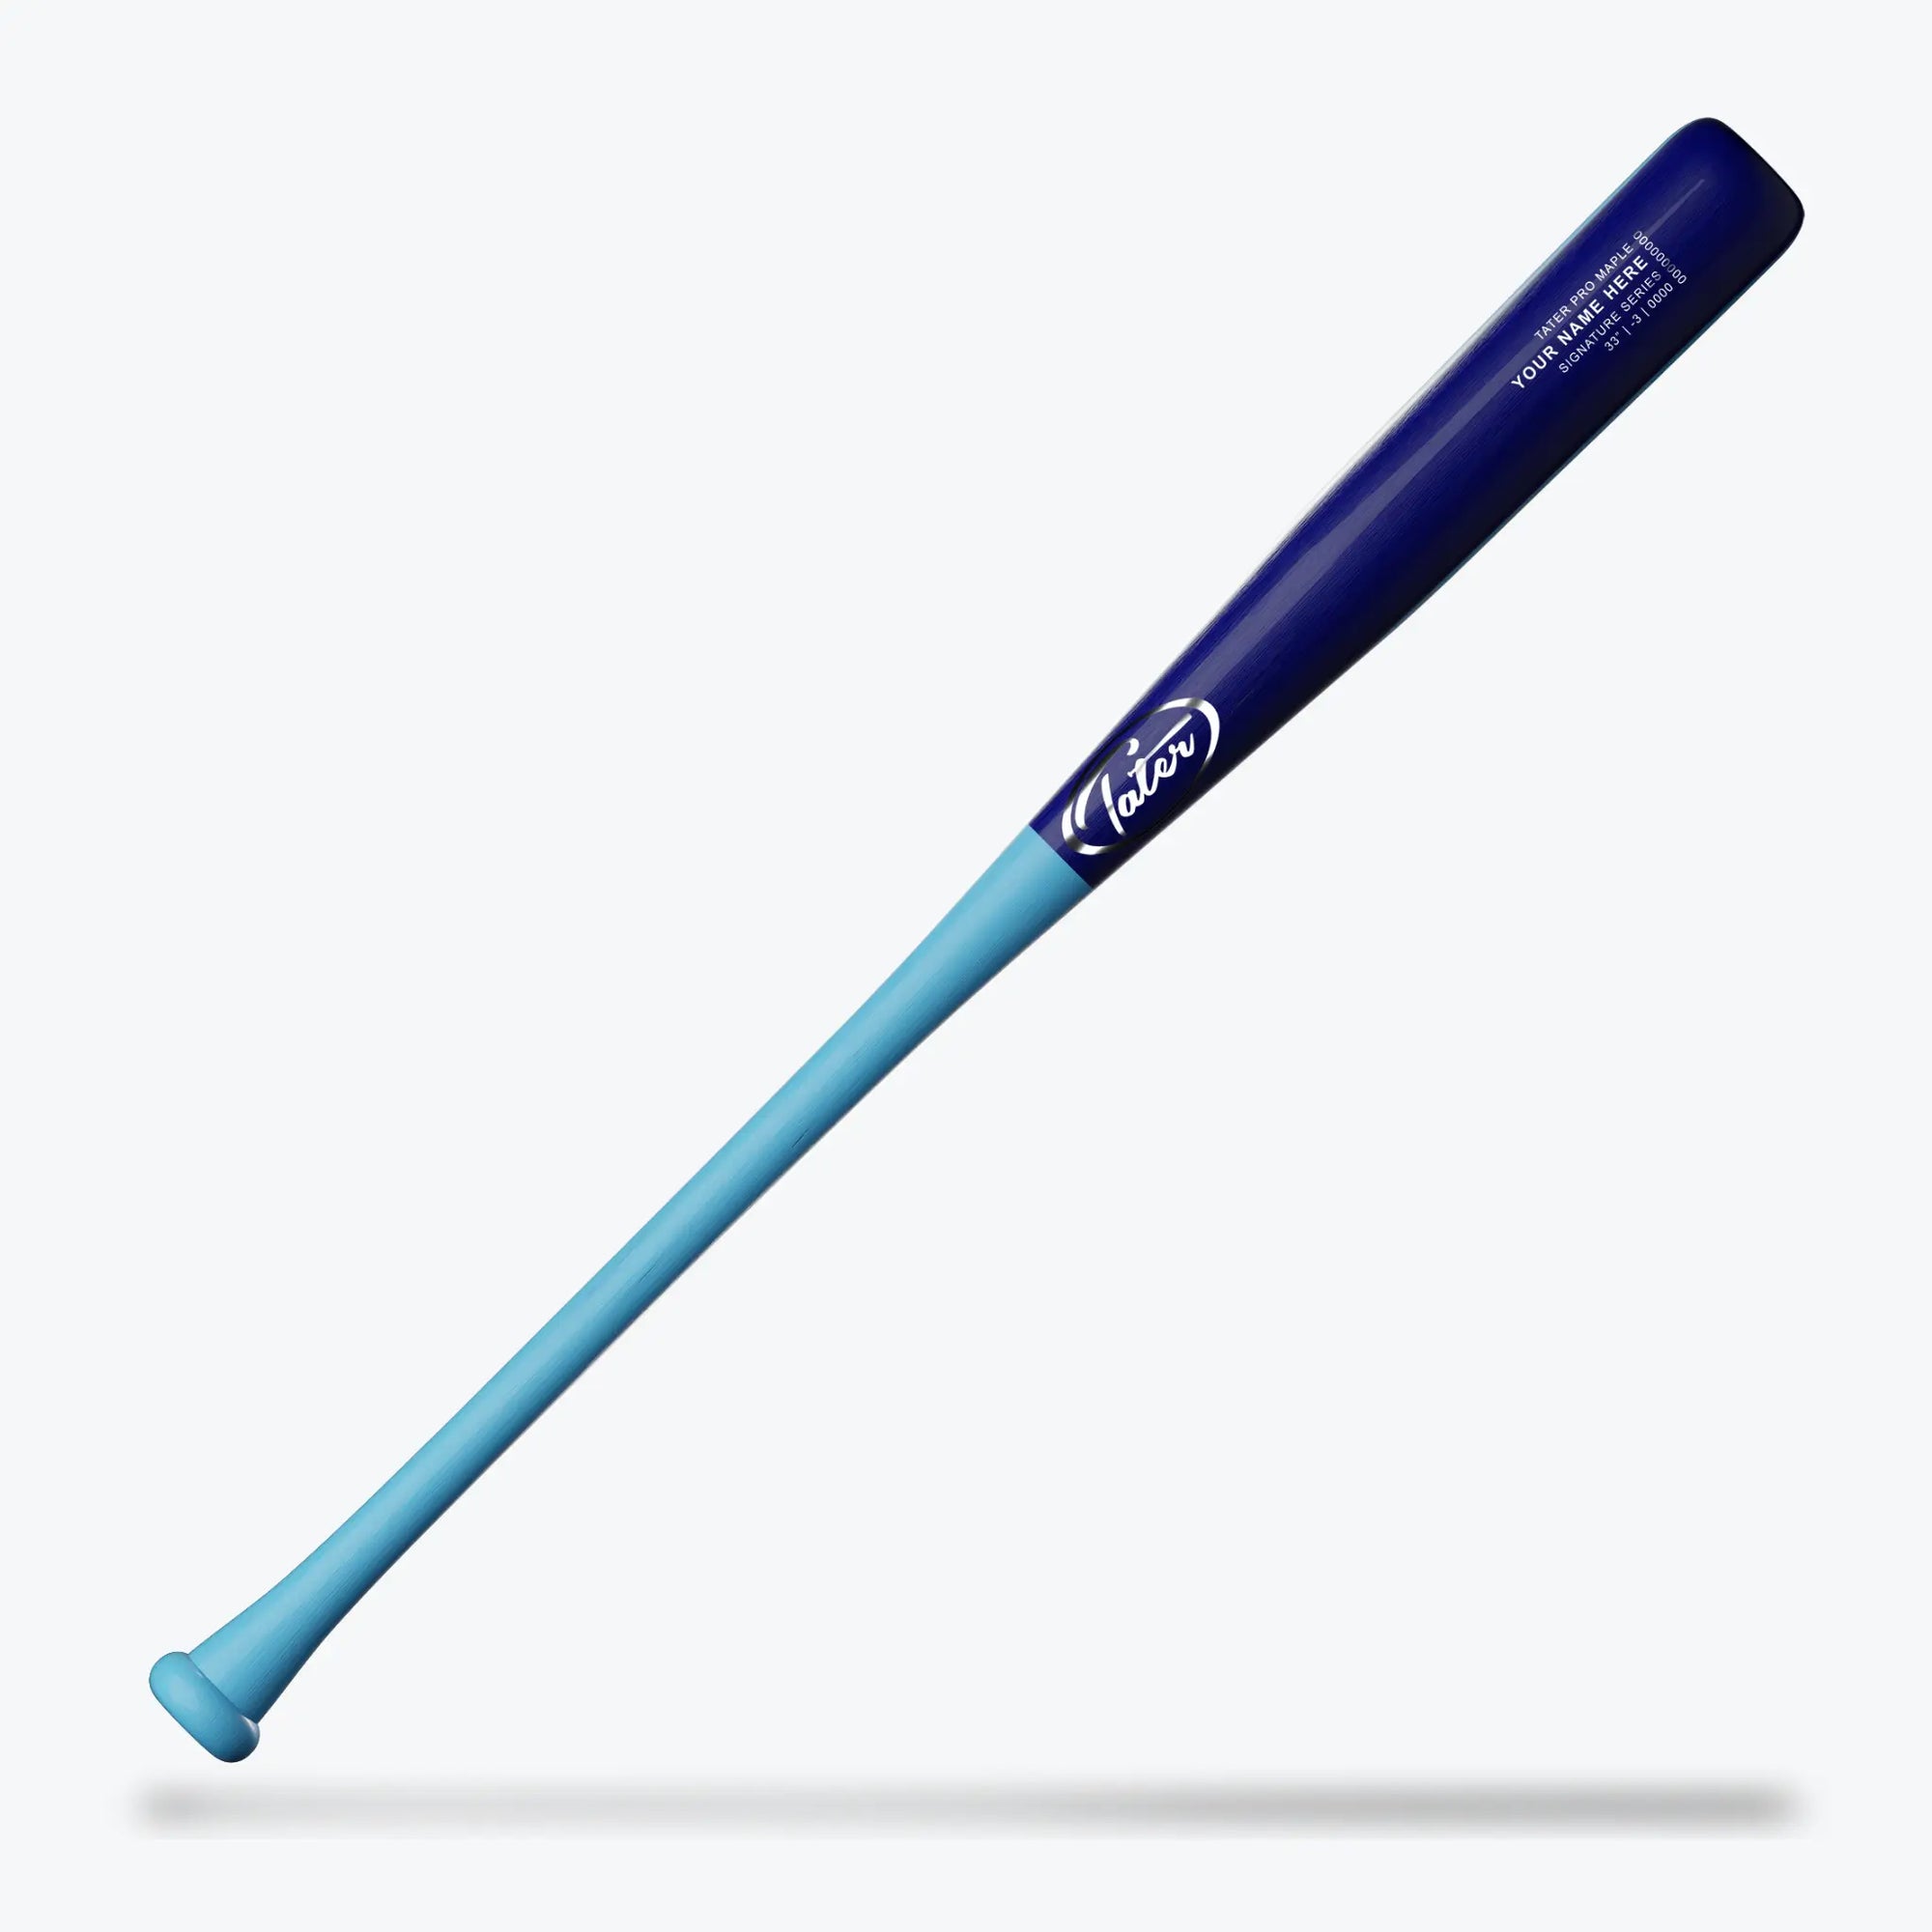 This image displays the Tater XL5, a custom wood bat that blends from a rich navy blue into a soft baby blue along its length. With a slight end-load, it's sized at 31, 32, or 33 inches with a minus drop-3 weight, striking the perfect balance for hitters who want both power and finesse.